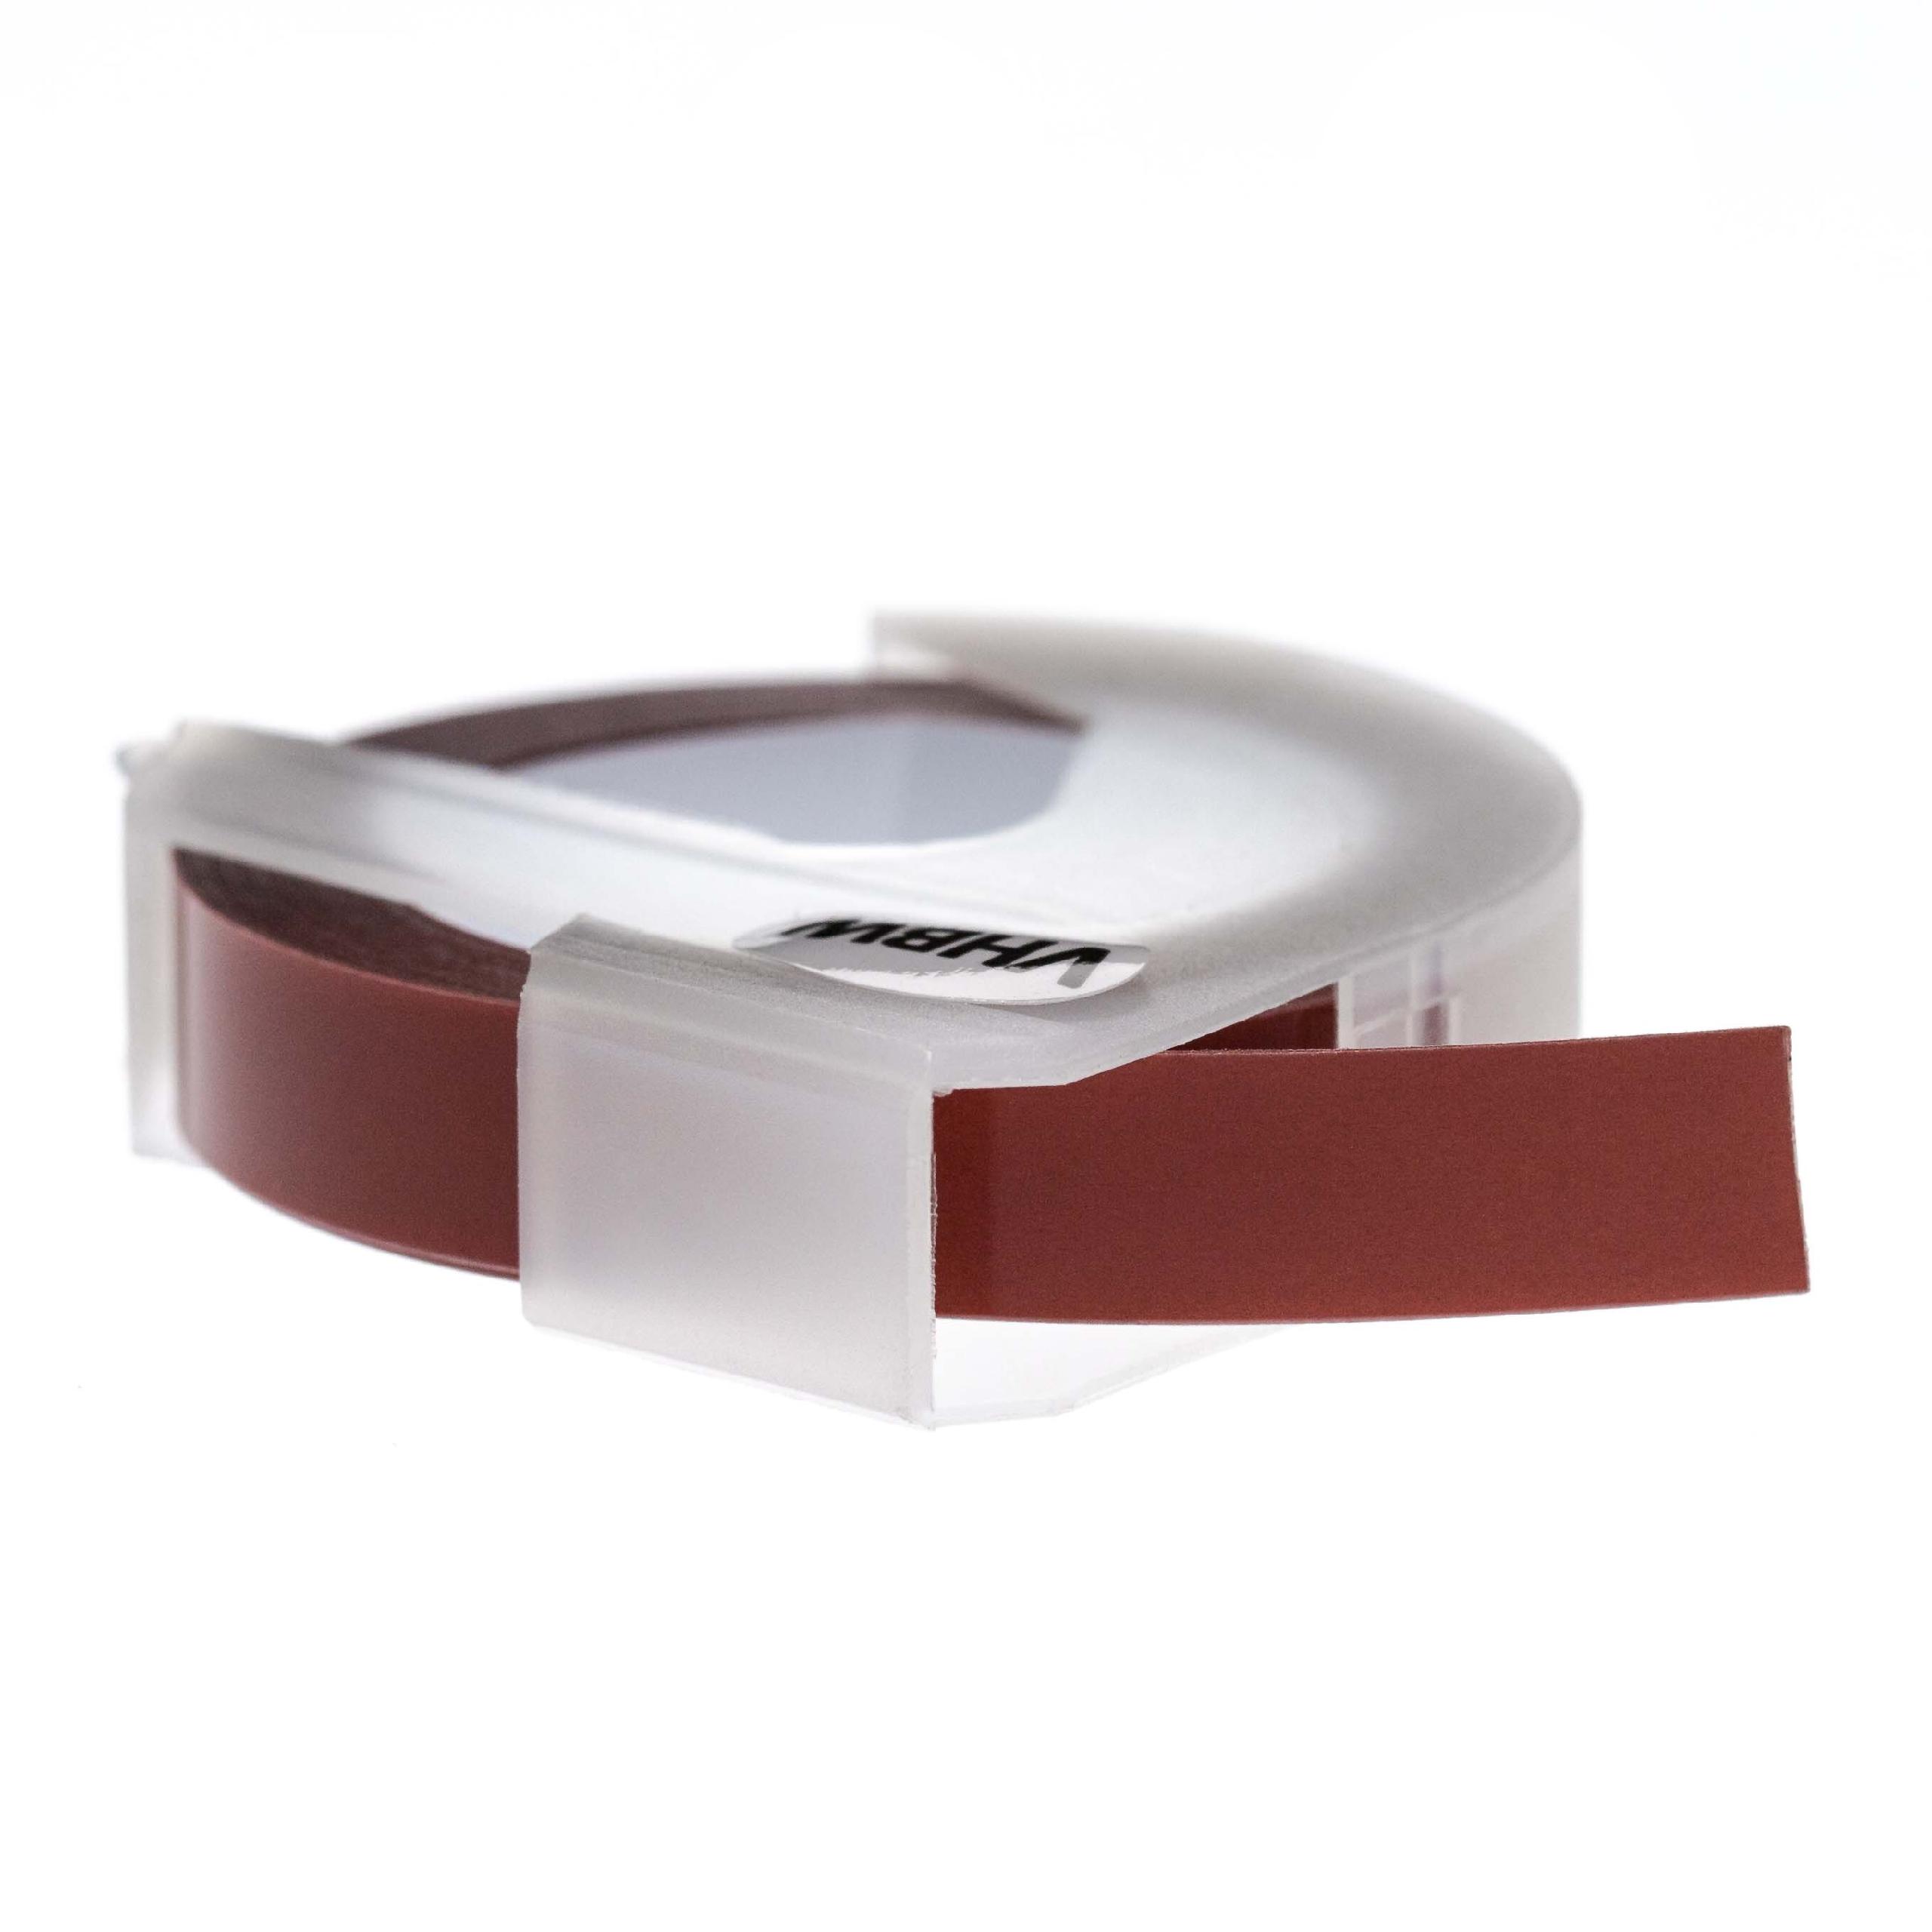 3D Embossing Label Tape as Replacement for Dymo 0898180, S0898180 - 9 mm White to Chestnut Brown